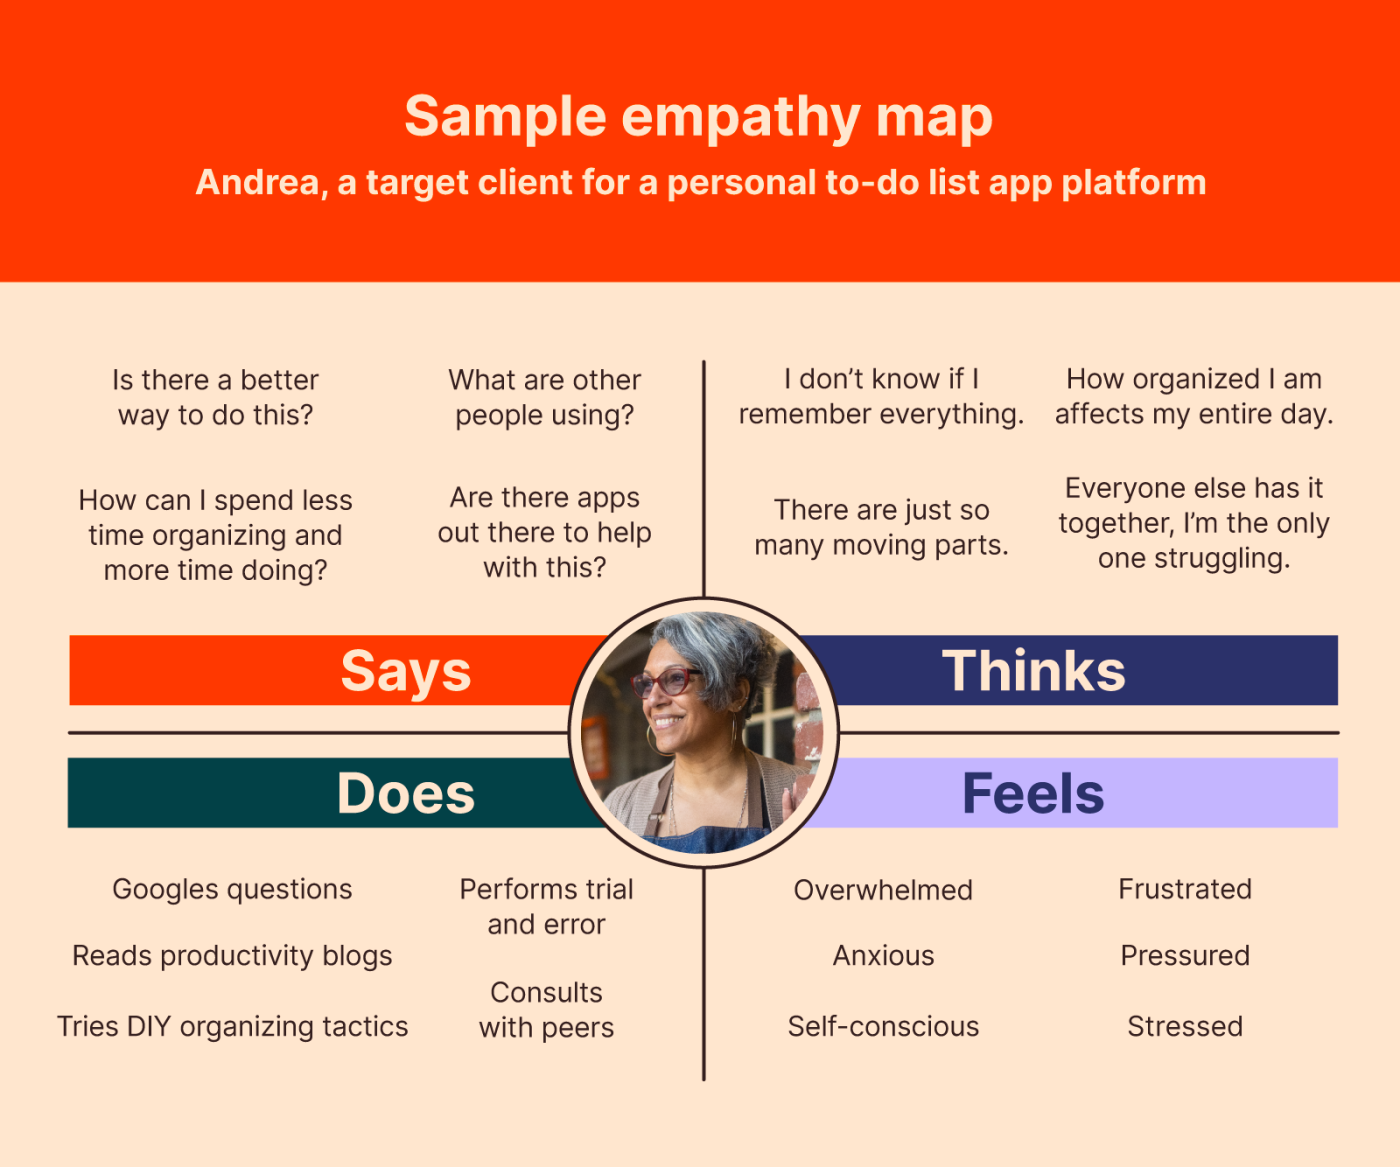 An example of an empathy map, with sectors dedicated to what the target customer says, thinks, does, and feels.